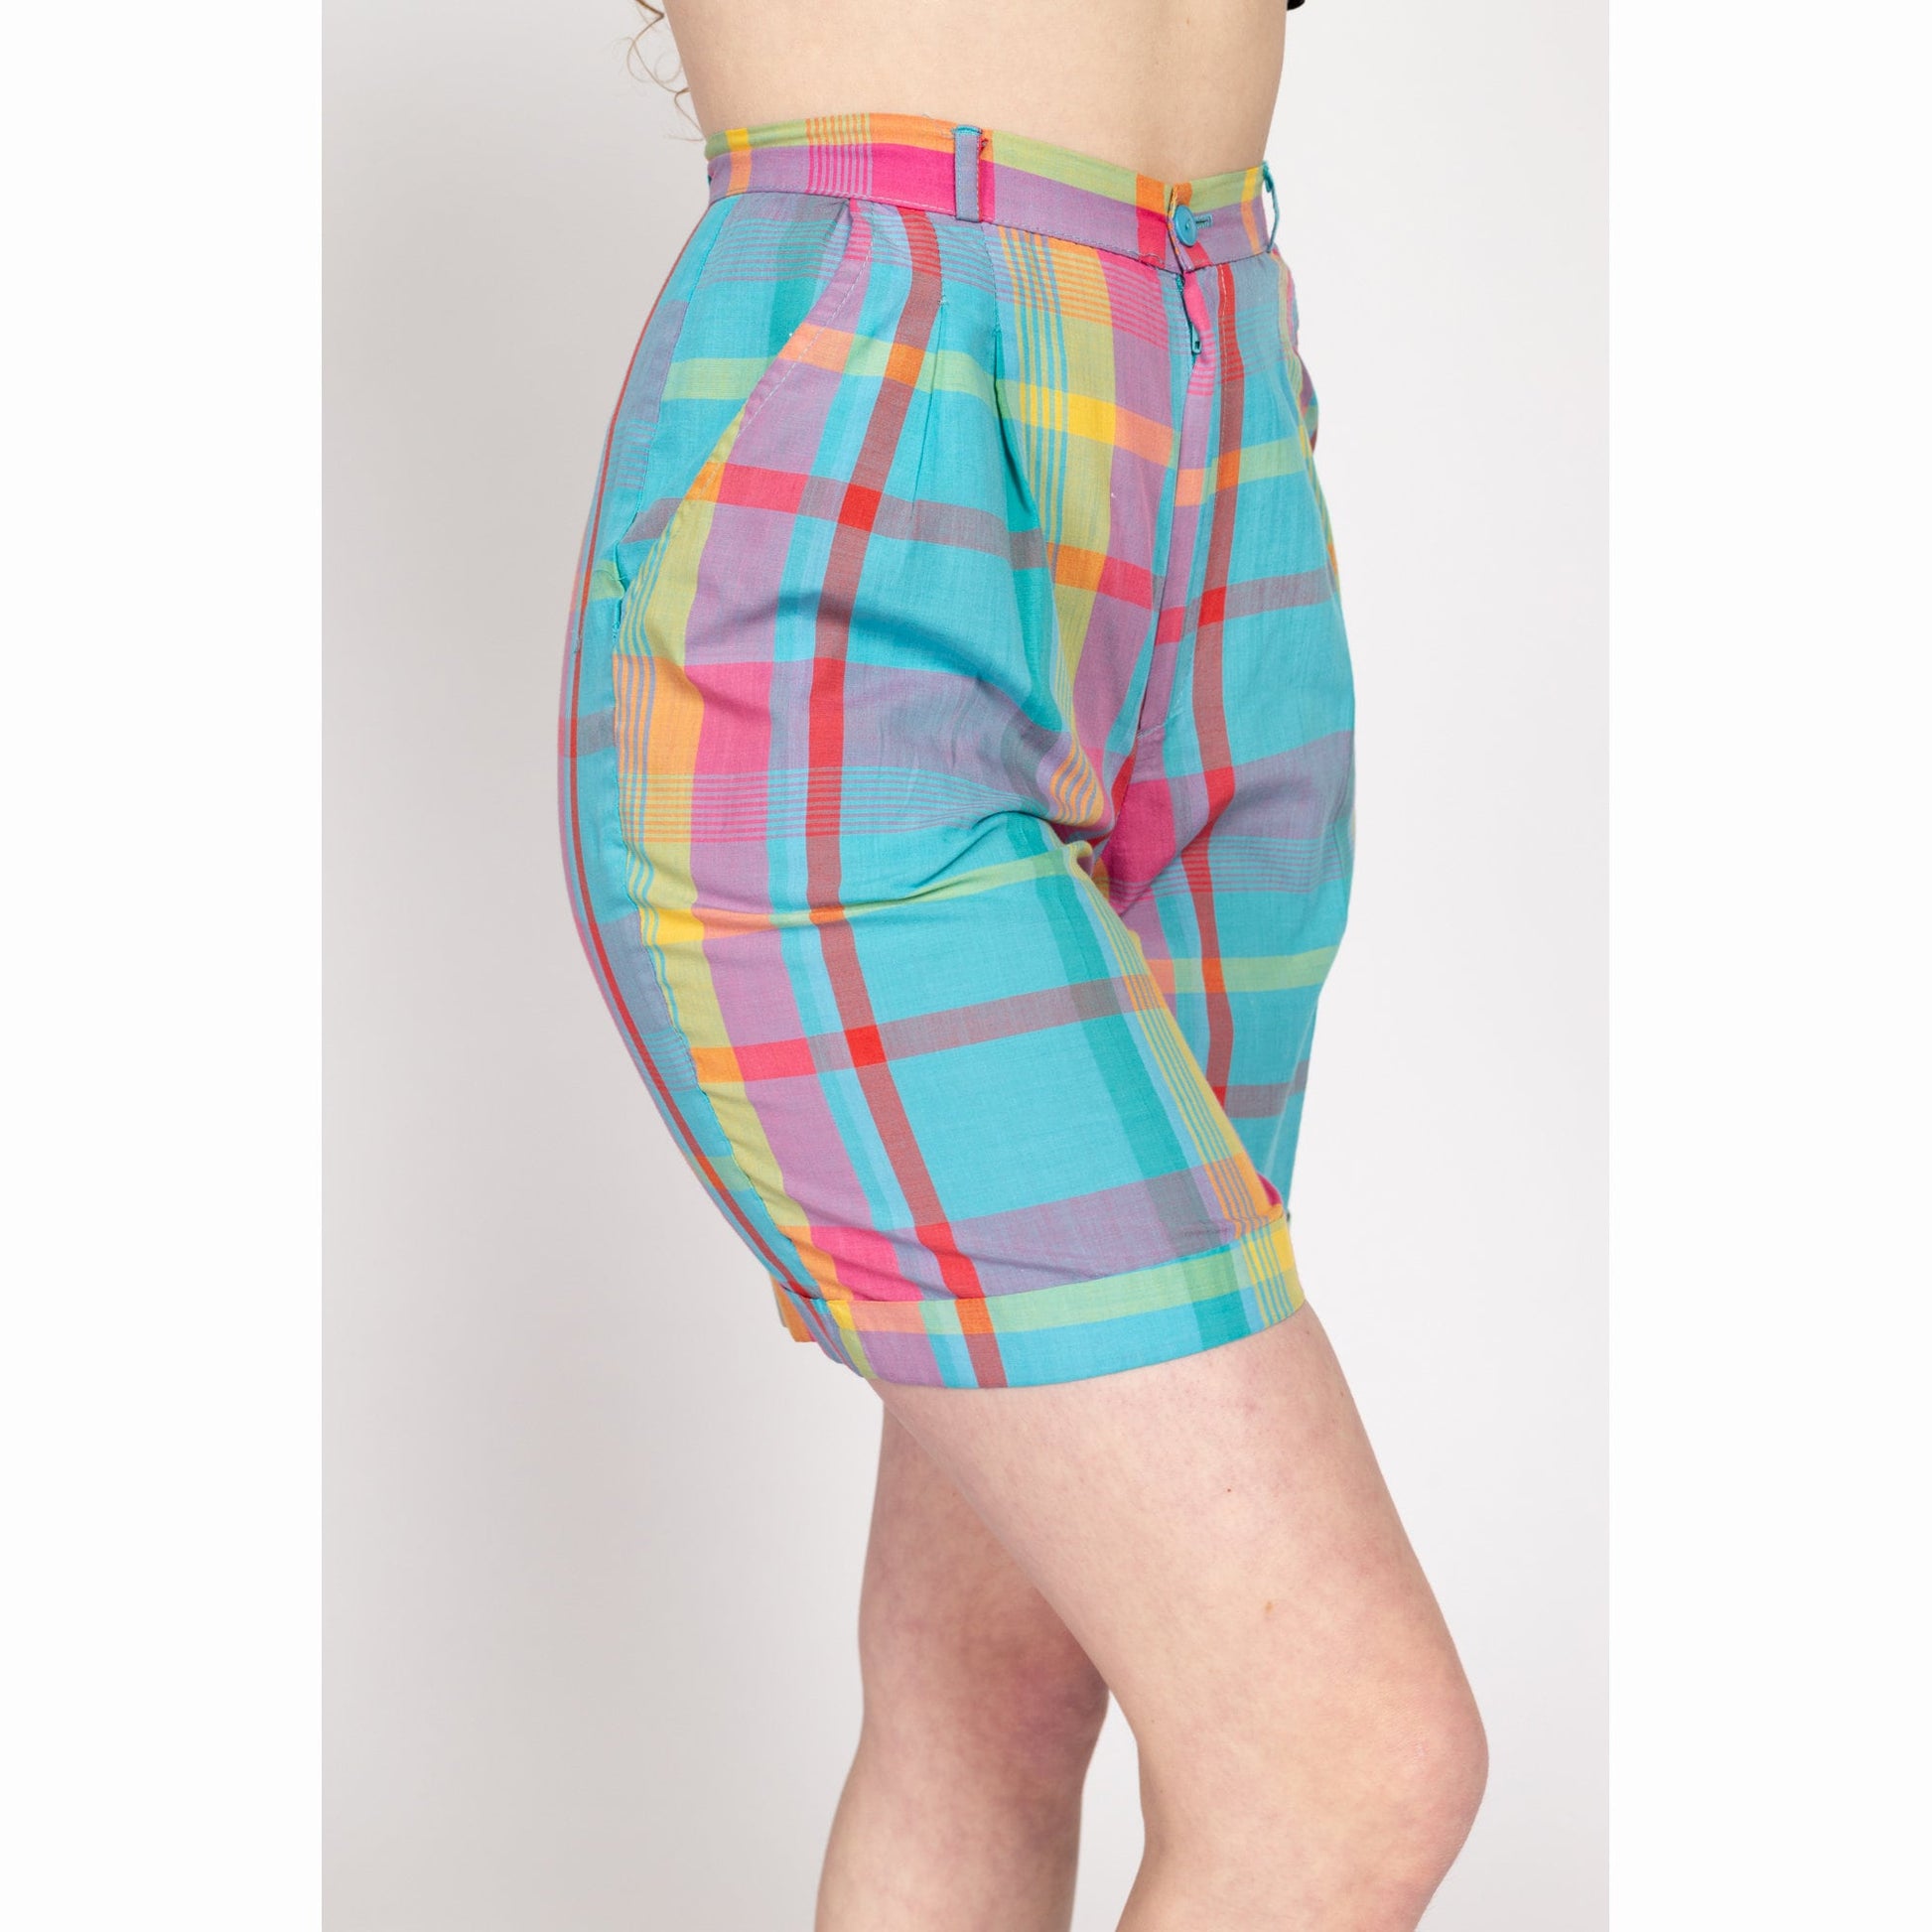 Small 80s Madras Plaid High Waisted Shorts 25.5" | Vintage High Waisted Casual Pleated Shorts